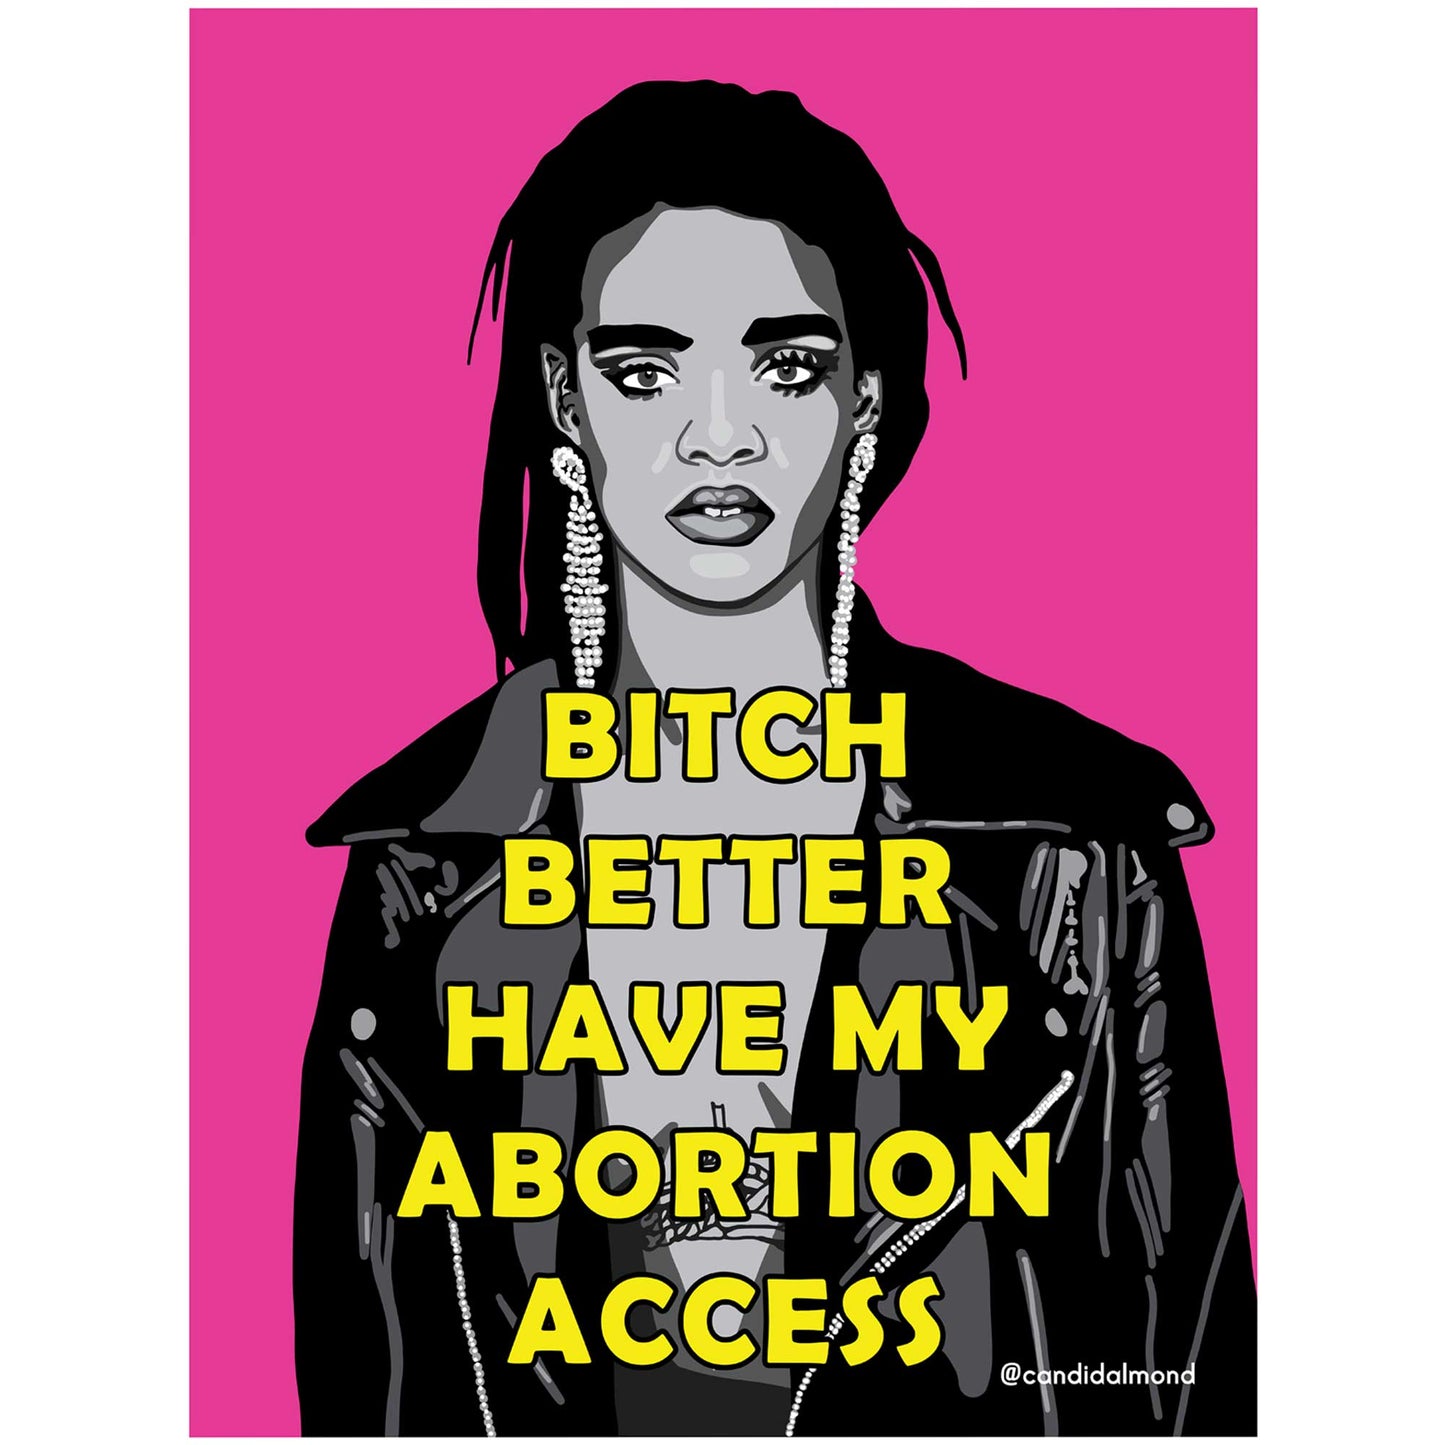 'Bitch Better Have My Abortion Access' FREE Digital Protest Poster